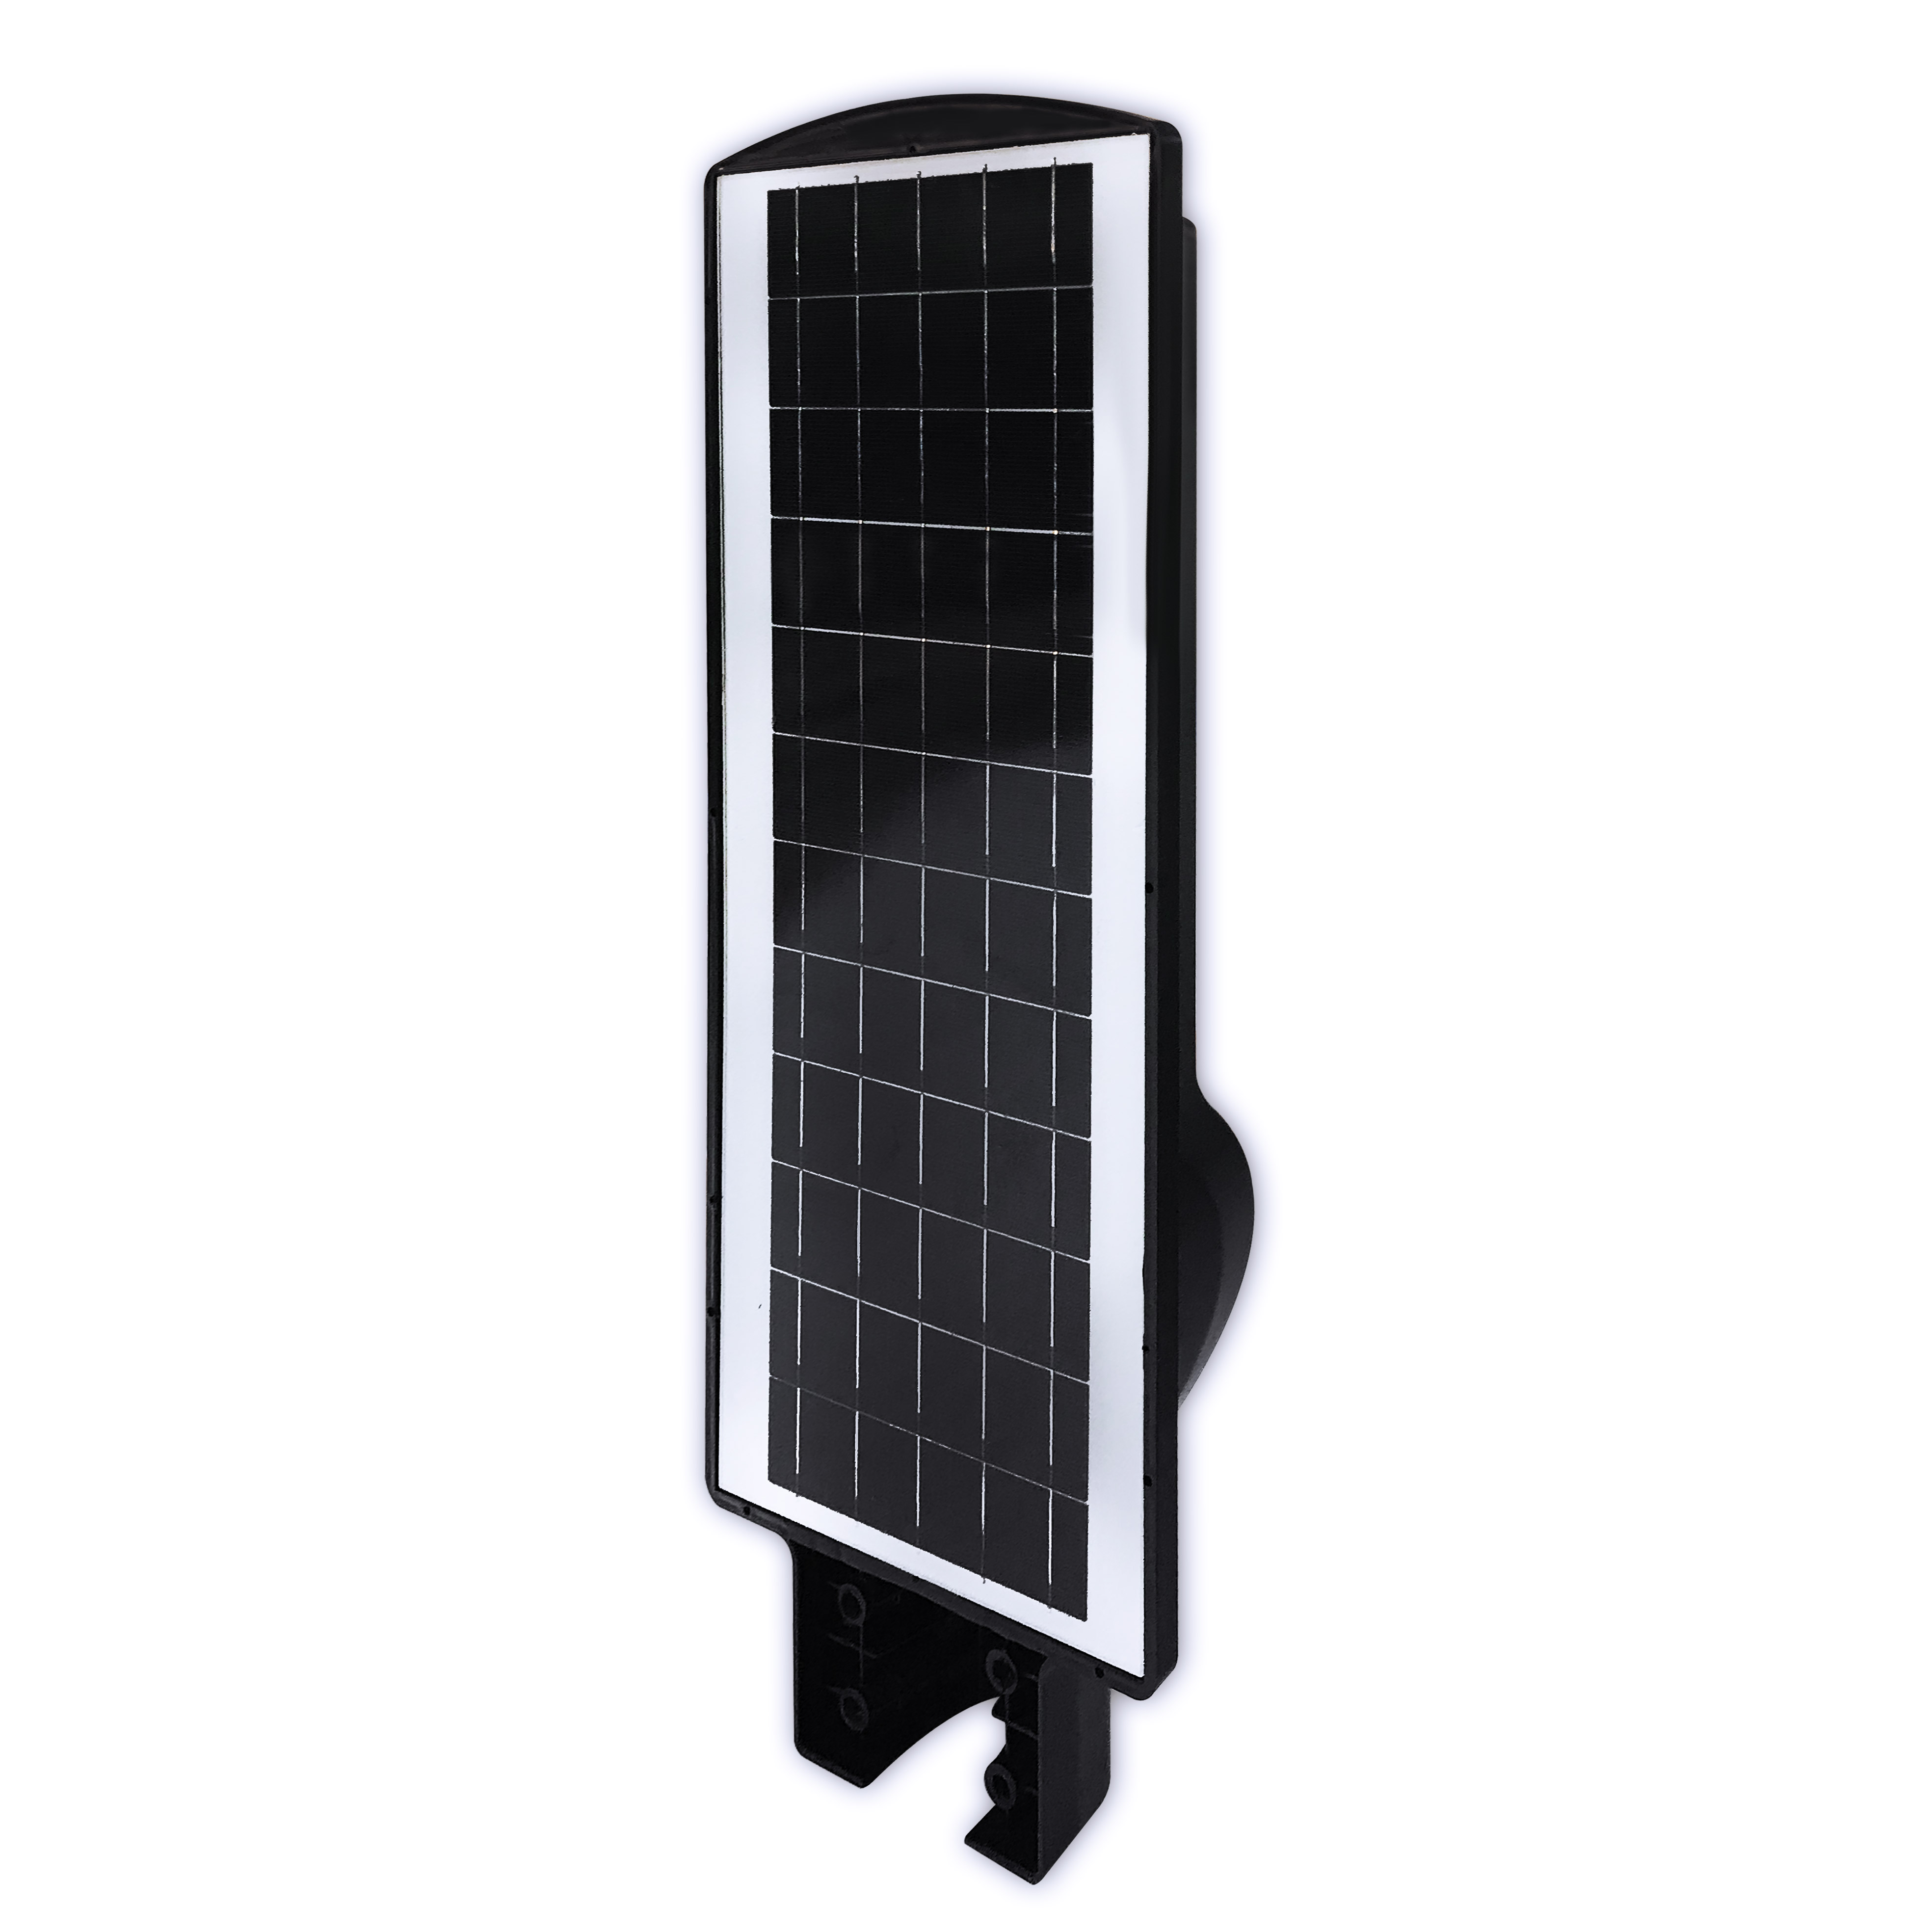 LED Solar Street Light High Power 90w with Remote Use for Road Or Garden